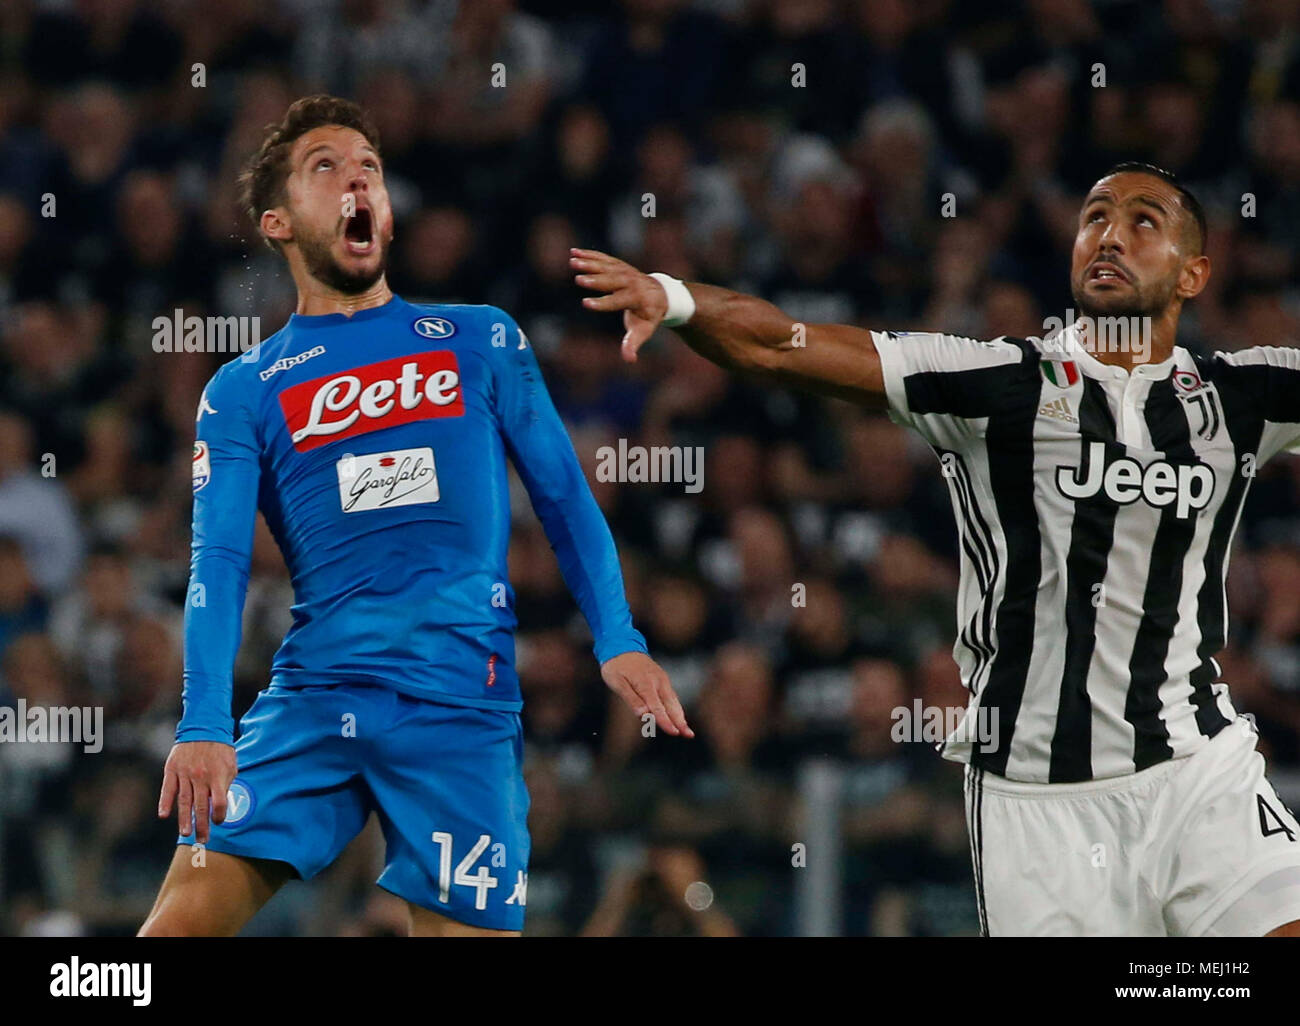 Turin, Italy. 22nd Apr, 2018. Dries Mertens and Mehdi Benatia of Juventus during the Italy Serie A soccer Match , Juventus - Napoli at Allianz Stadium Turin Italy April 22 2018 Credit: agnfoto/Alamy Live News Stock Photo